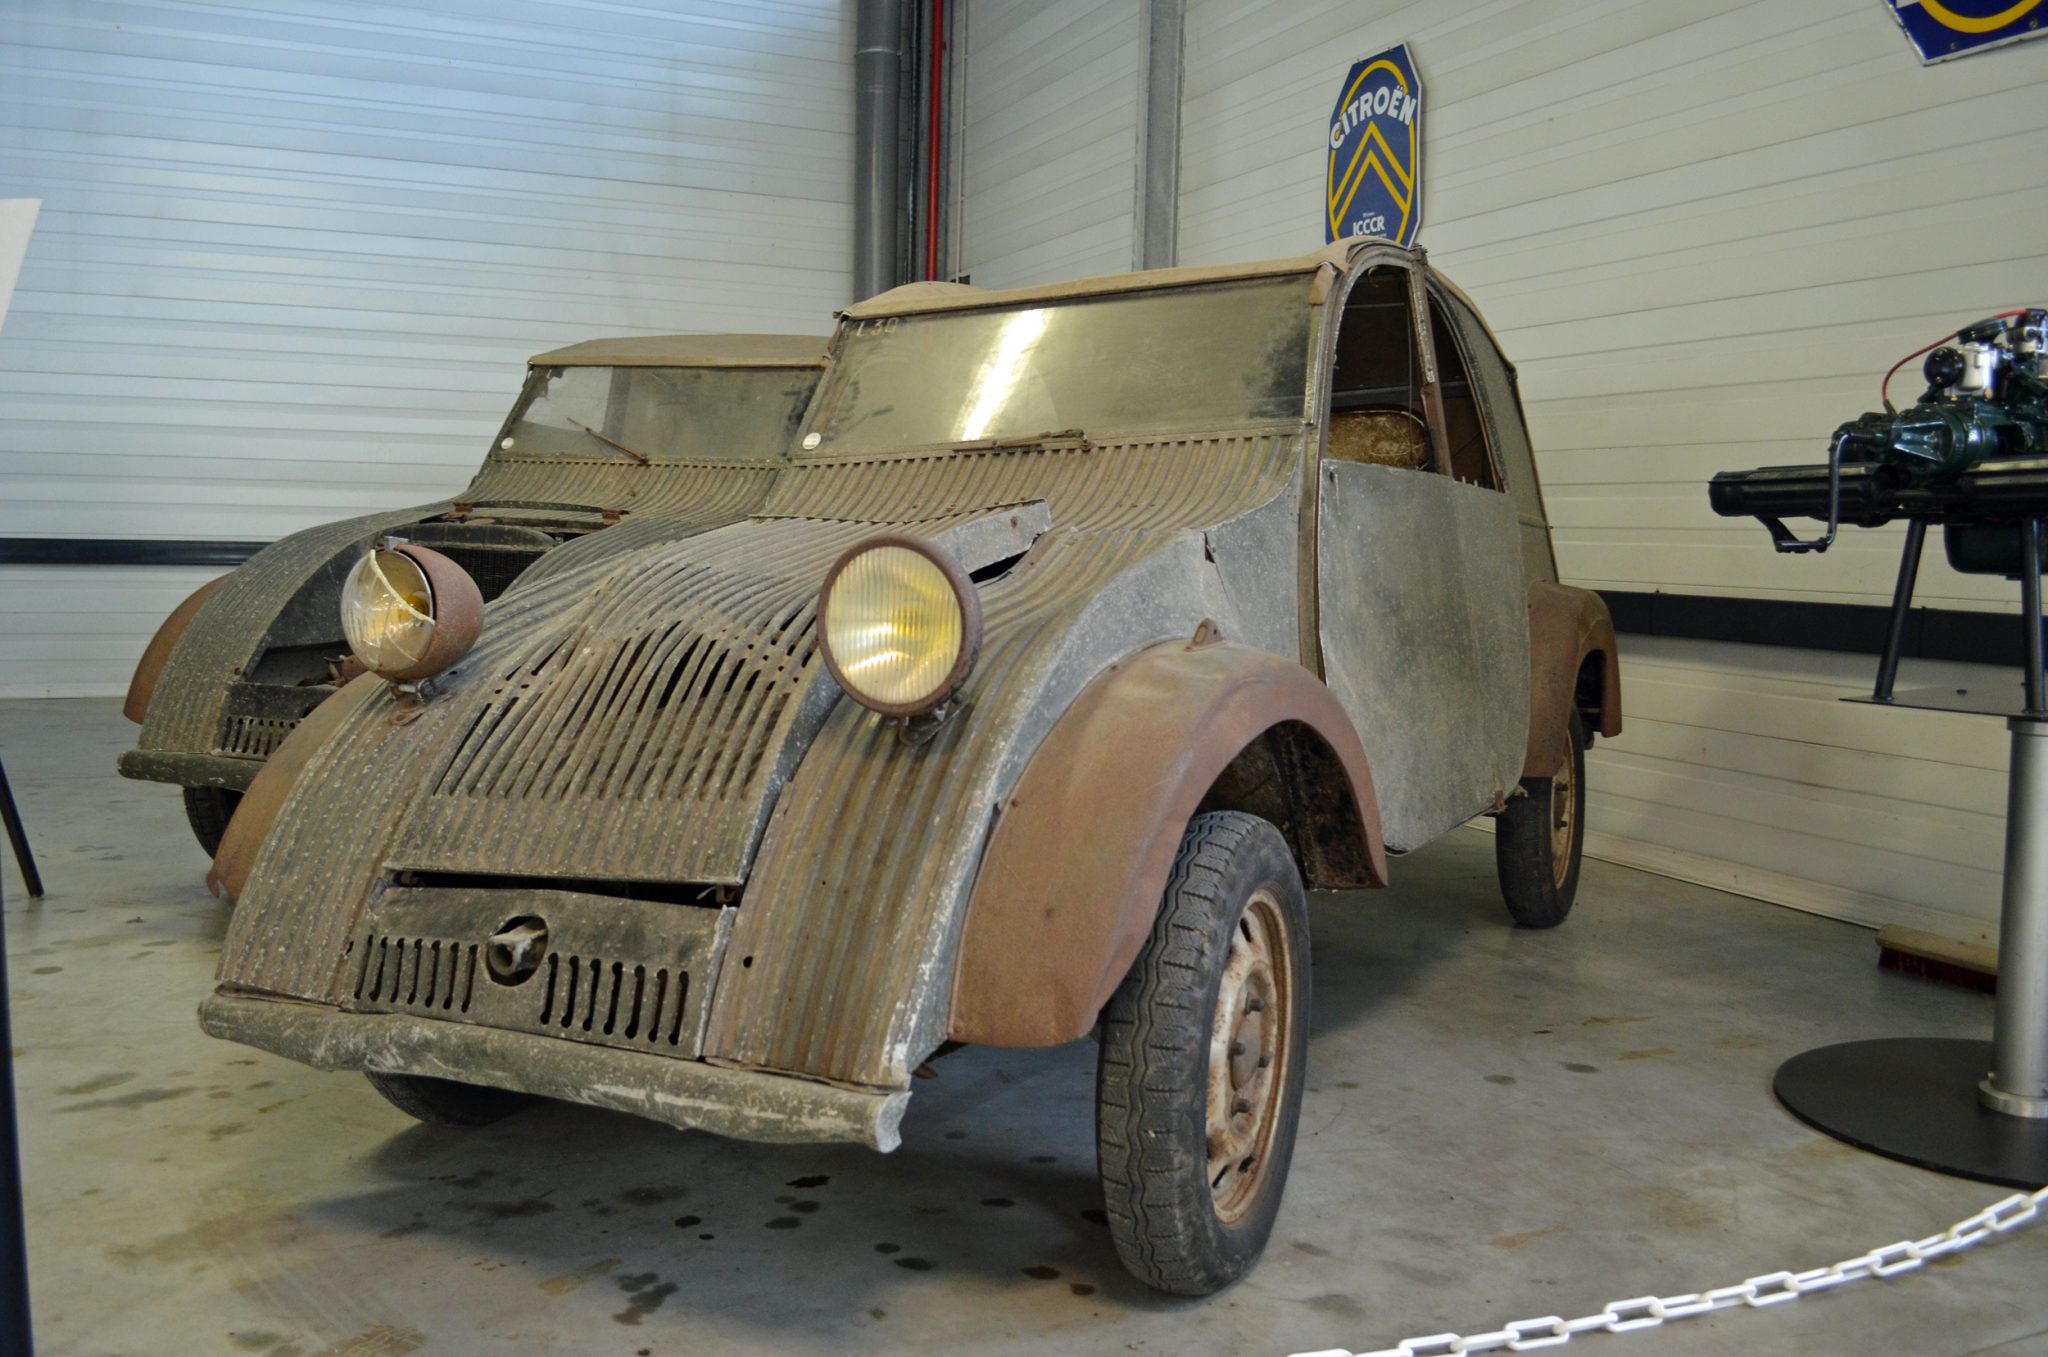 Toute Petite Voiture: the mythical car that gave rise to the Citroën 2CV